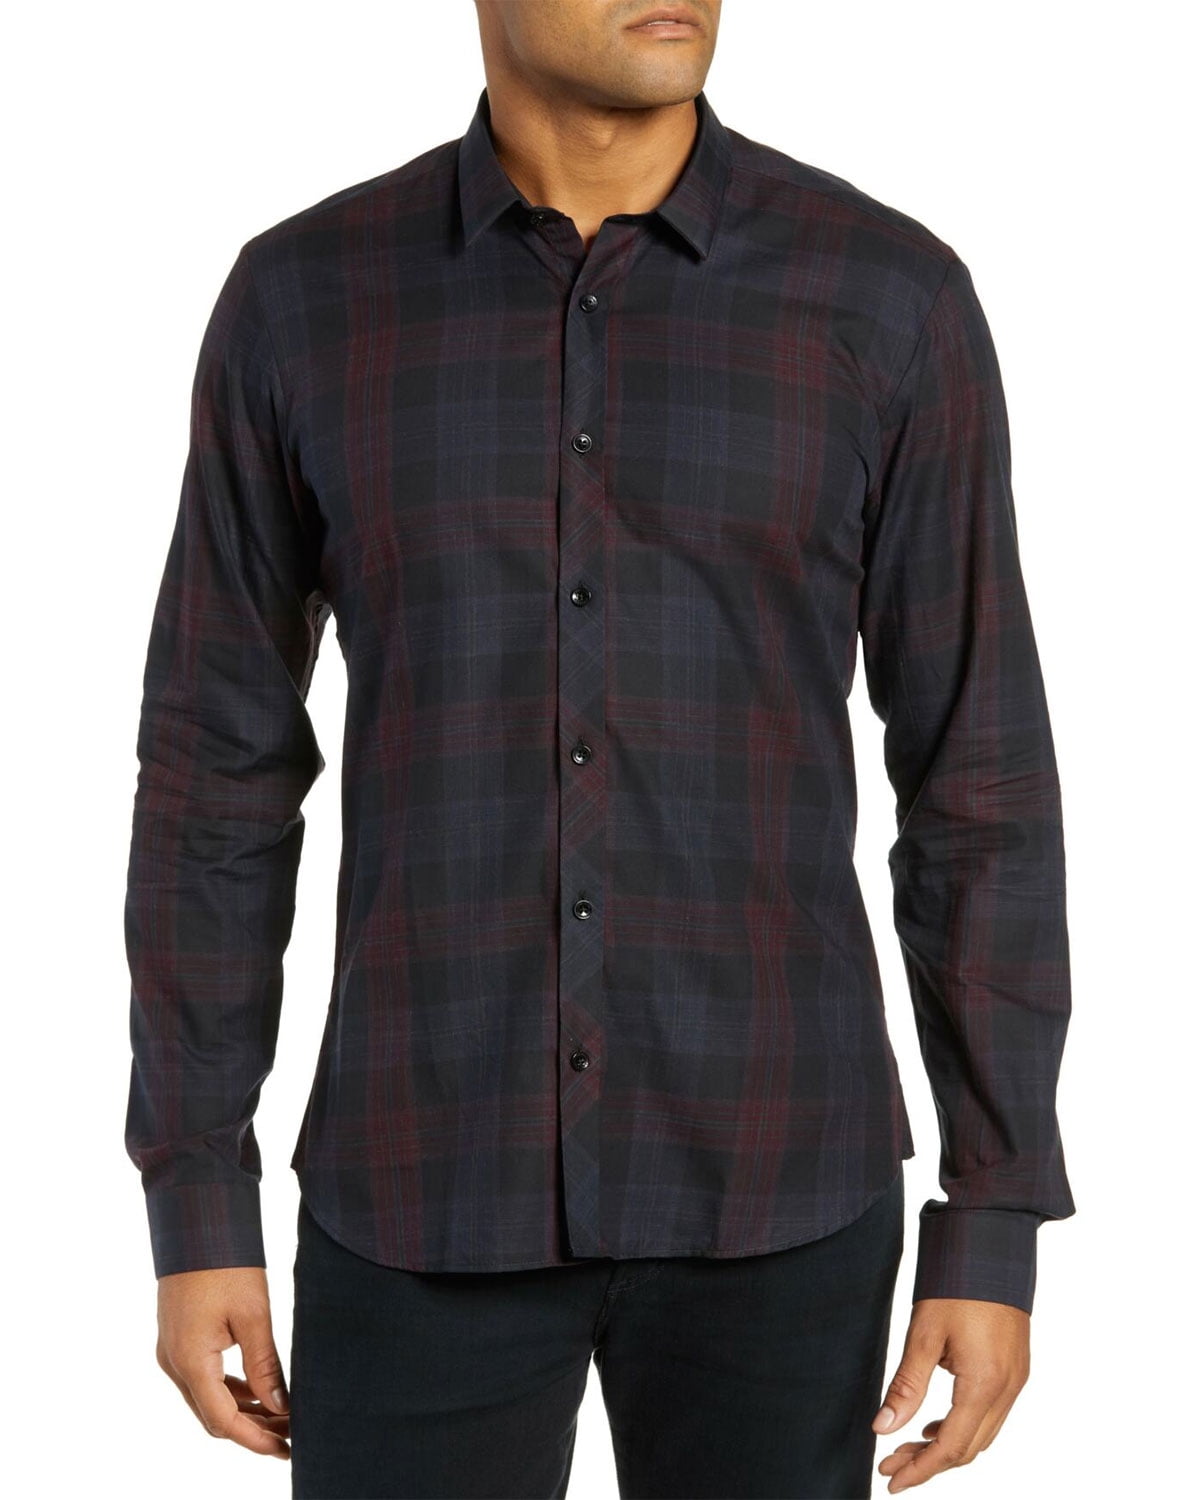 Jared Lang Mens Shirt in Red and Navy Plaid